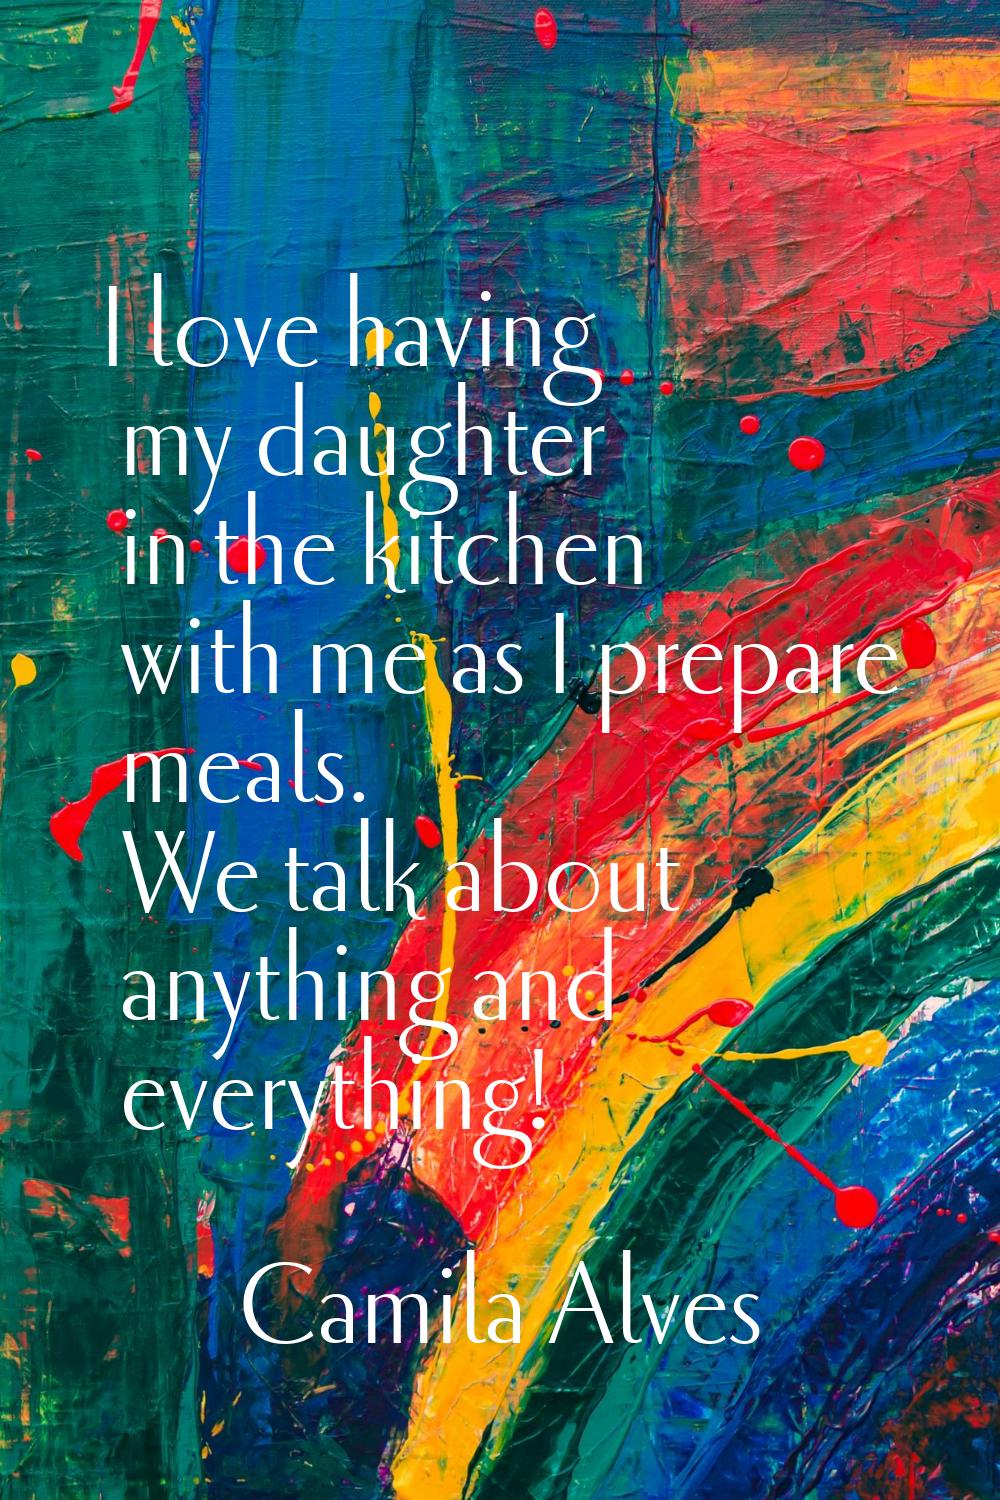 I love having my daughter in the kitchen with me as I prepare meals. We talk about anything and eve